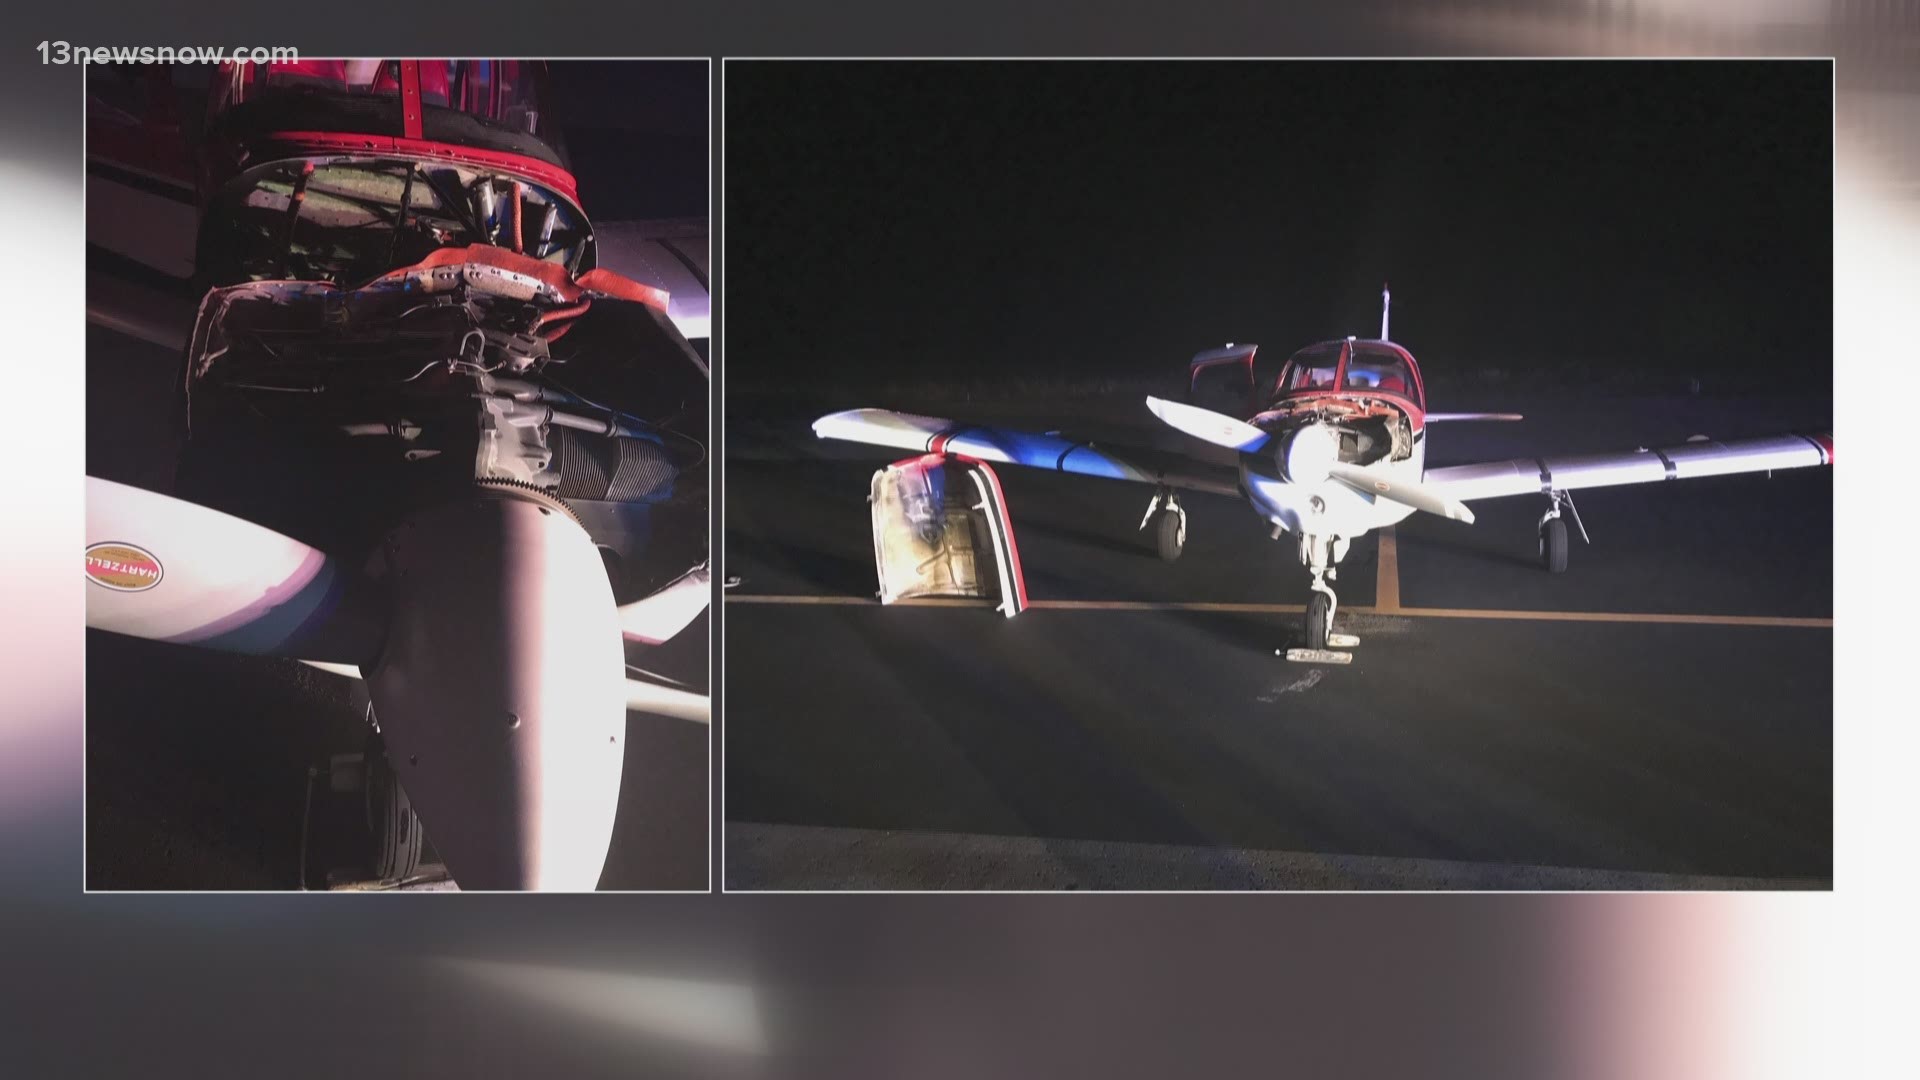 The airplane caught on fire and had to make an emergency landing around 10:20 p.m. Virginia State Police said it was coming from Richmond at the time it happened.